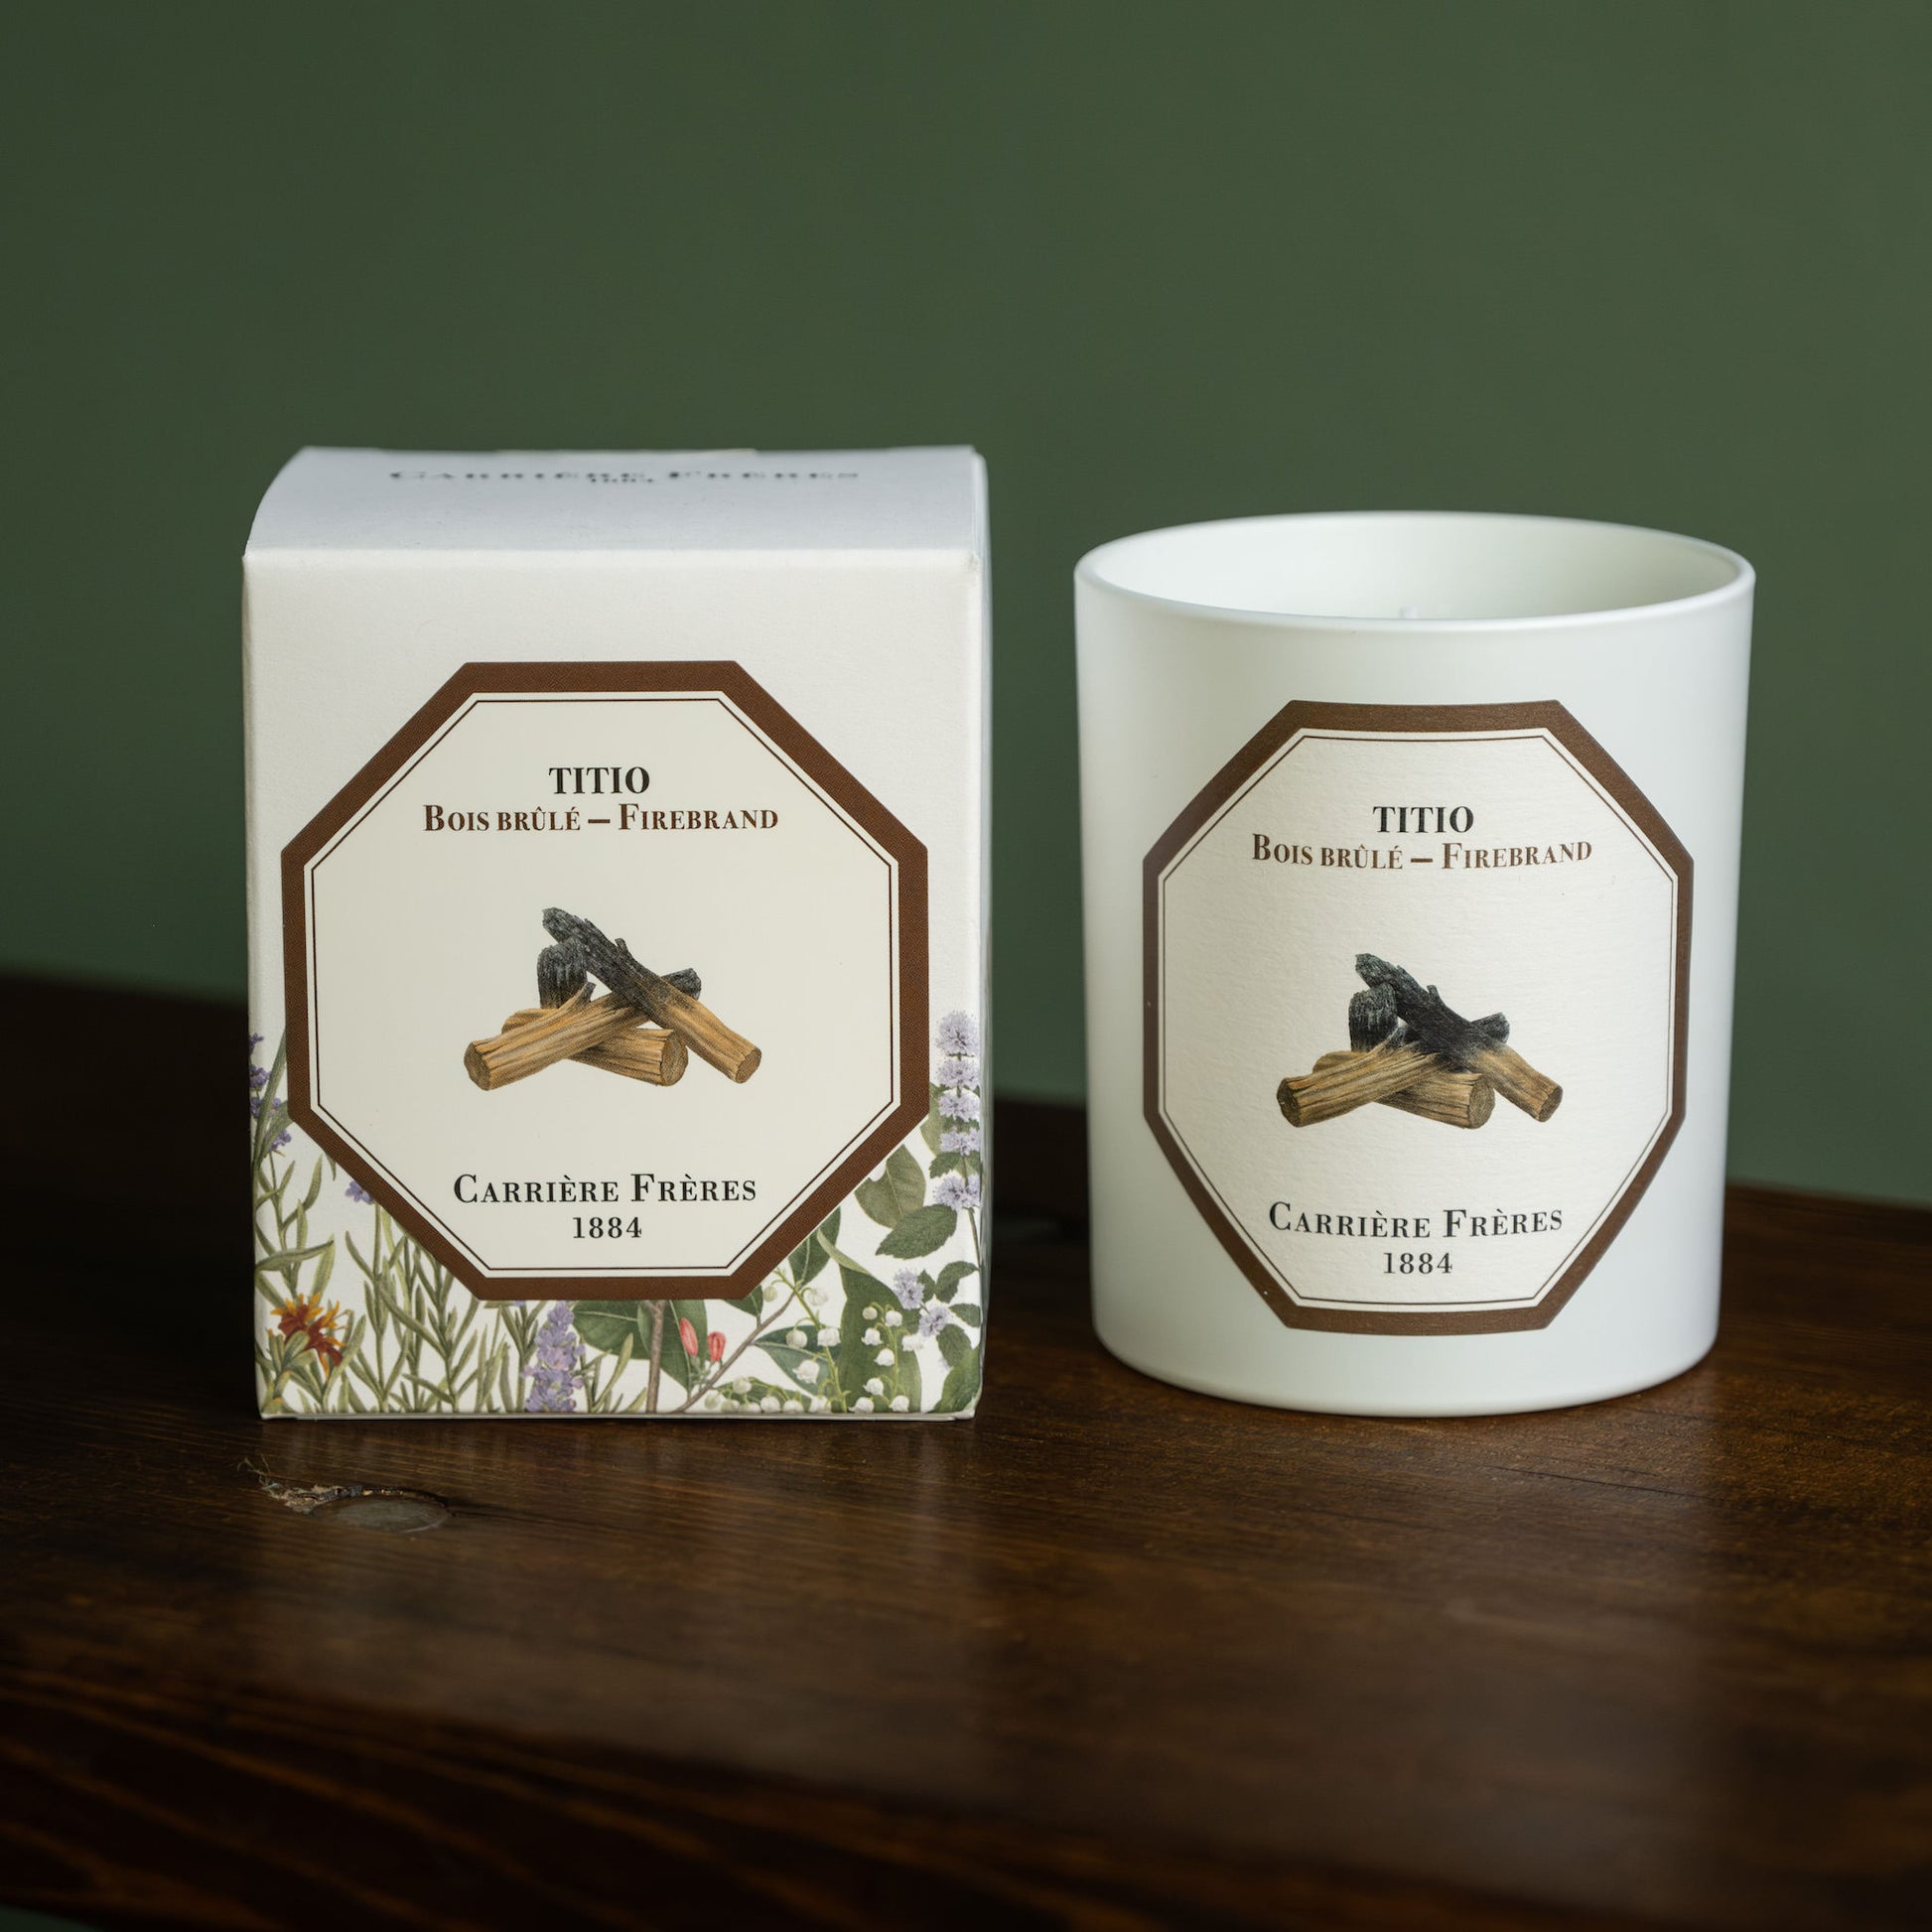 Carriere Freres Firebrand Scented Candle & Box